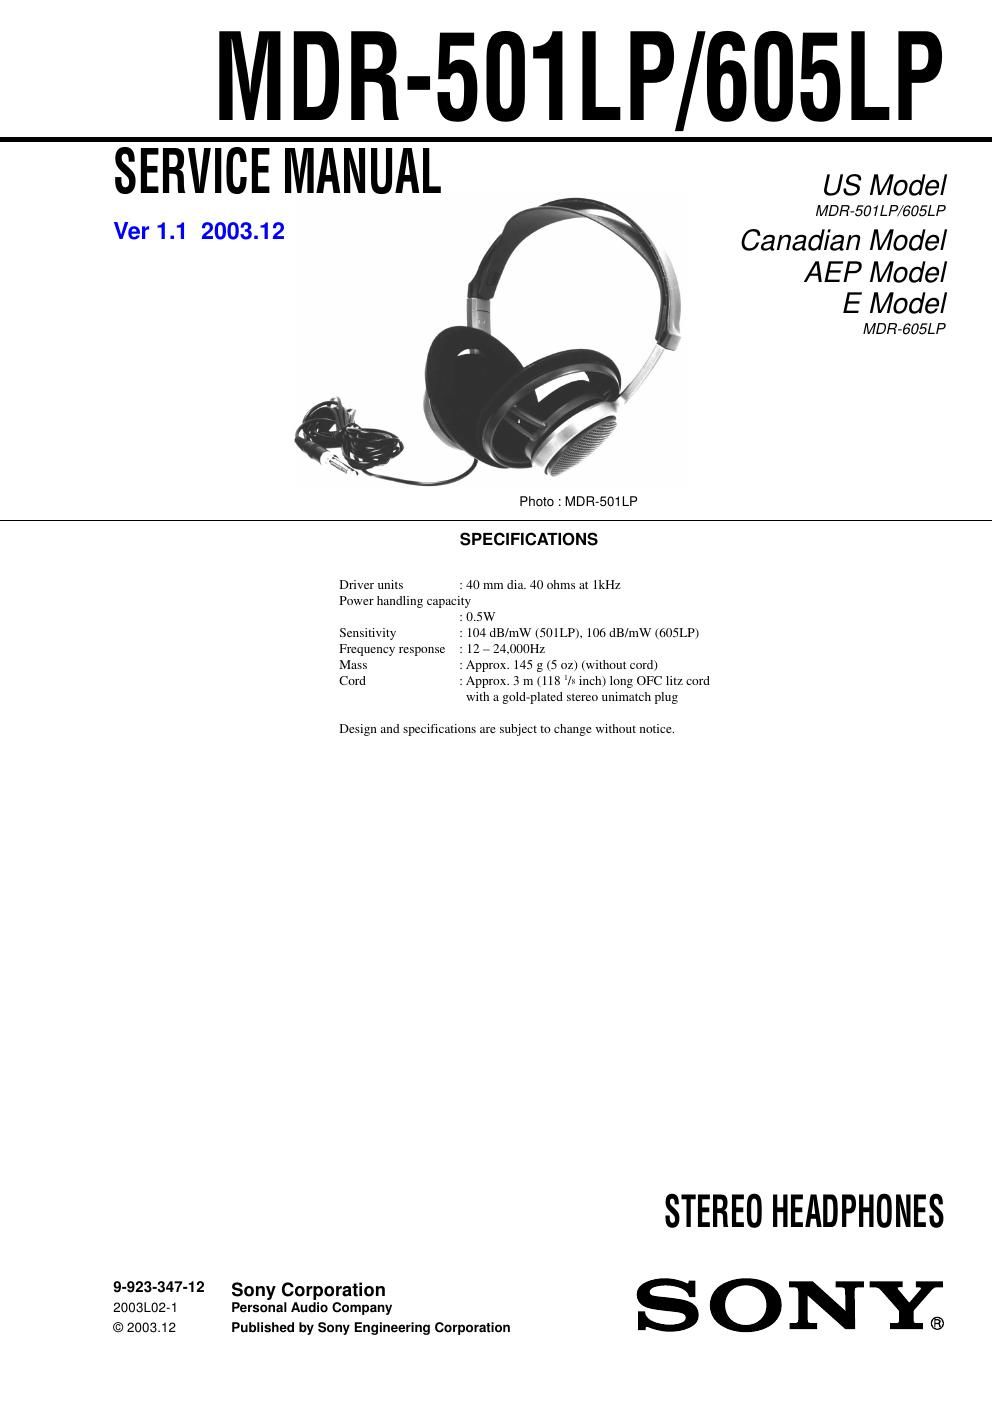 sony mdr 501 lp service manual